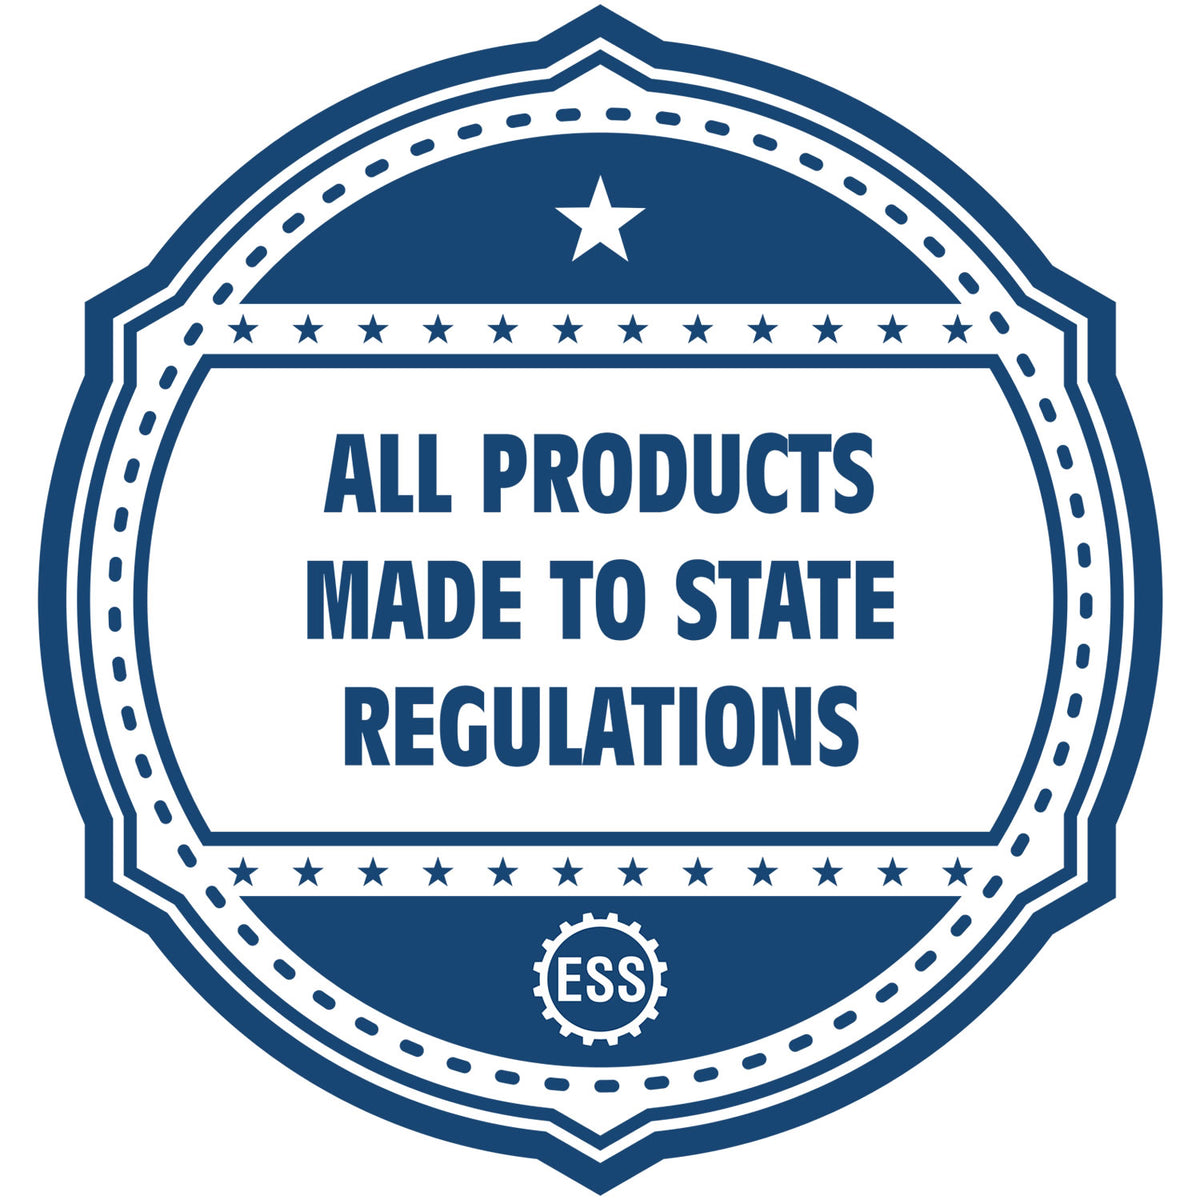 An icon or badge element for the Long Reach Missouri Land Surveyor Seal showing that this product is made in compliance with state regulations.